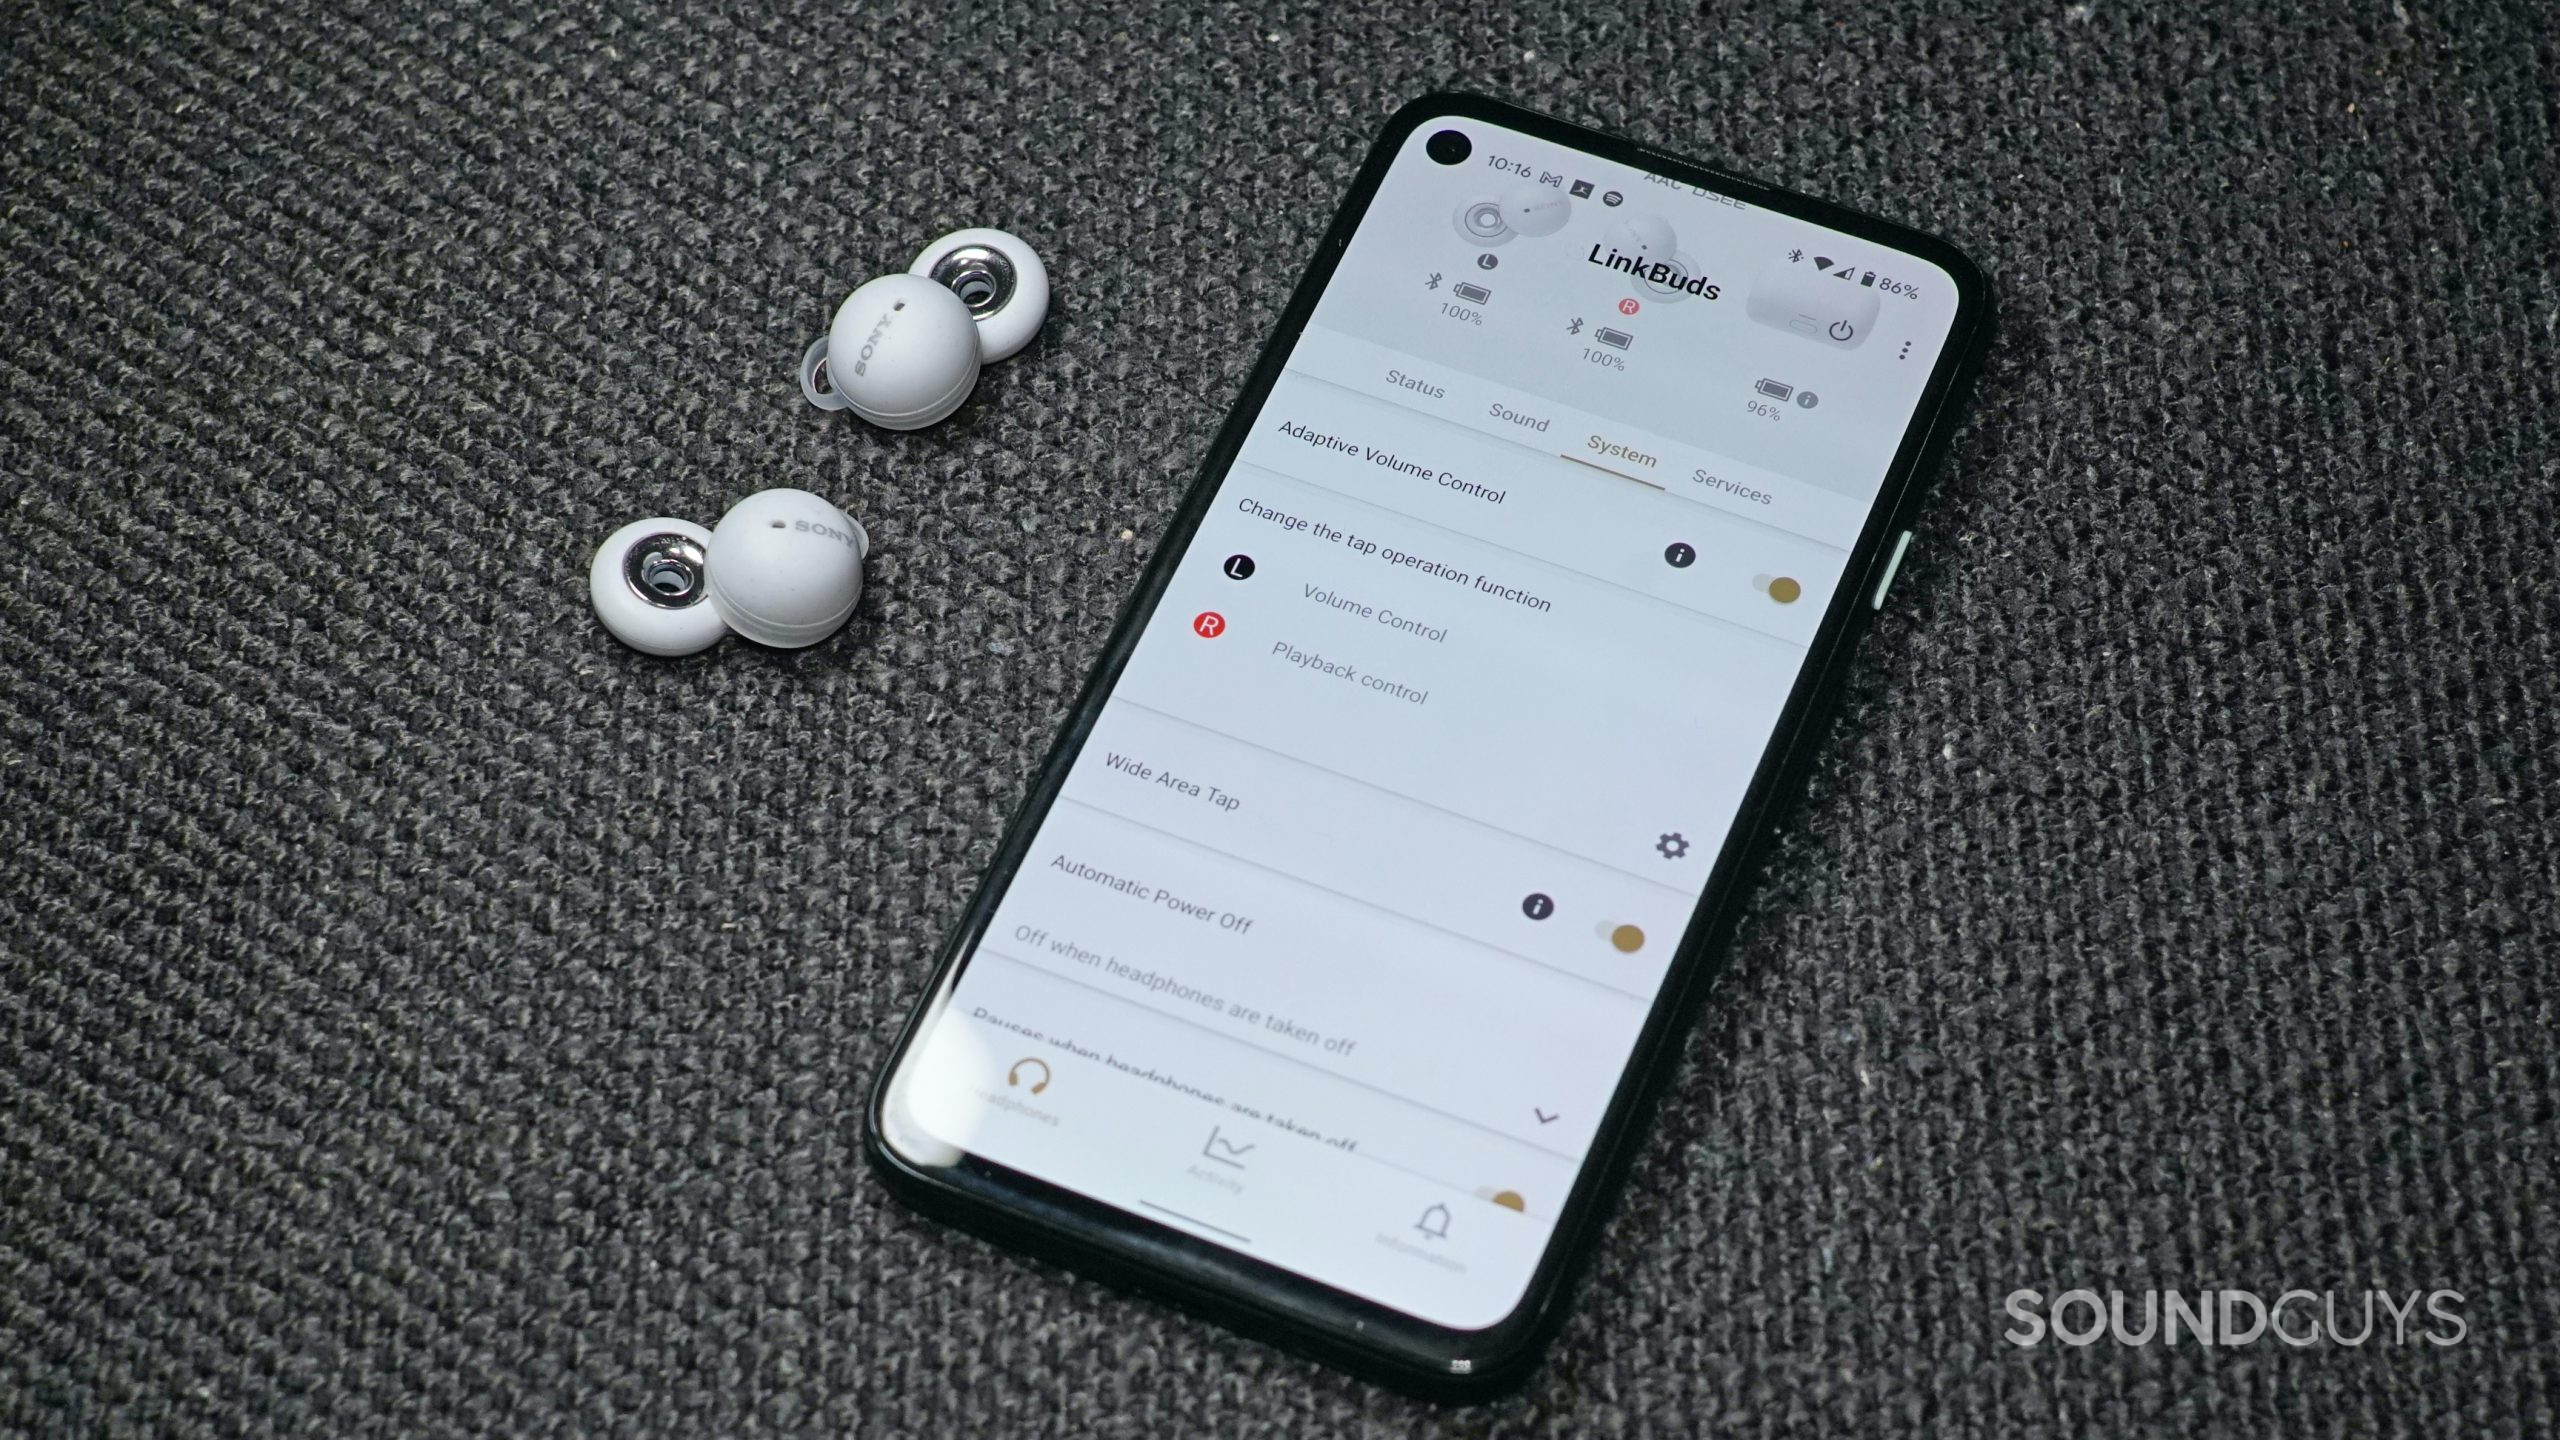 The Sony LinkBuds lie on a fabric surface next to a Google Pixel 4a displaying the Sony LinkBuds page of the Sony Headphones Connect app.